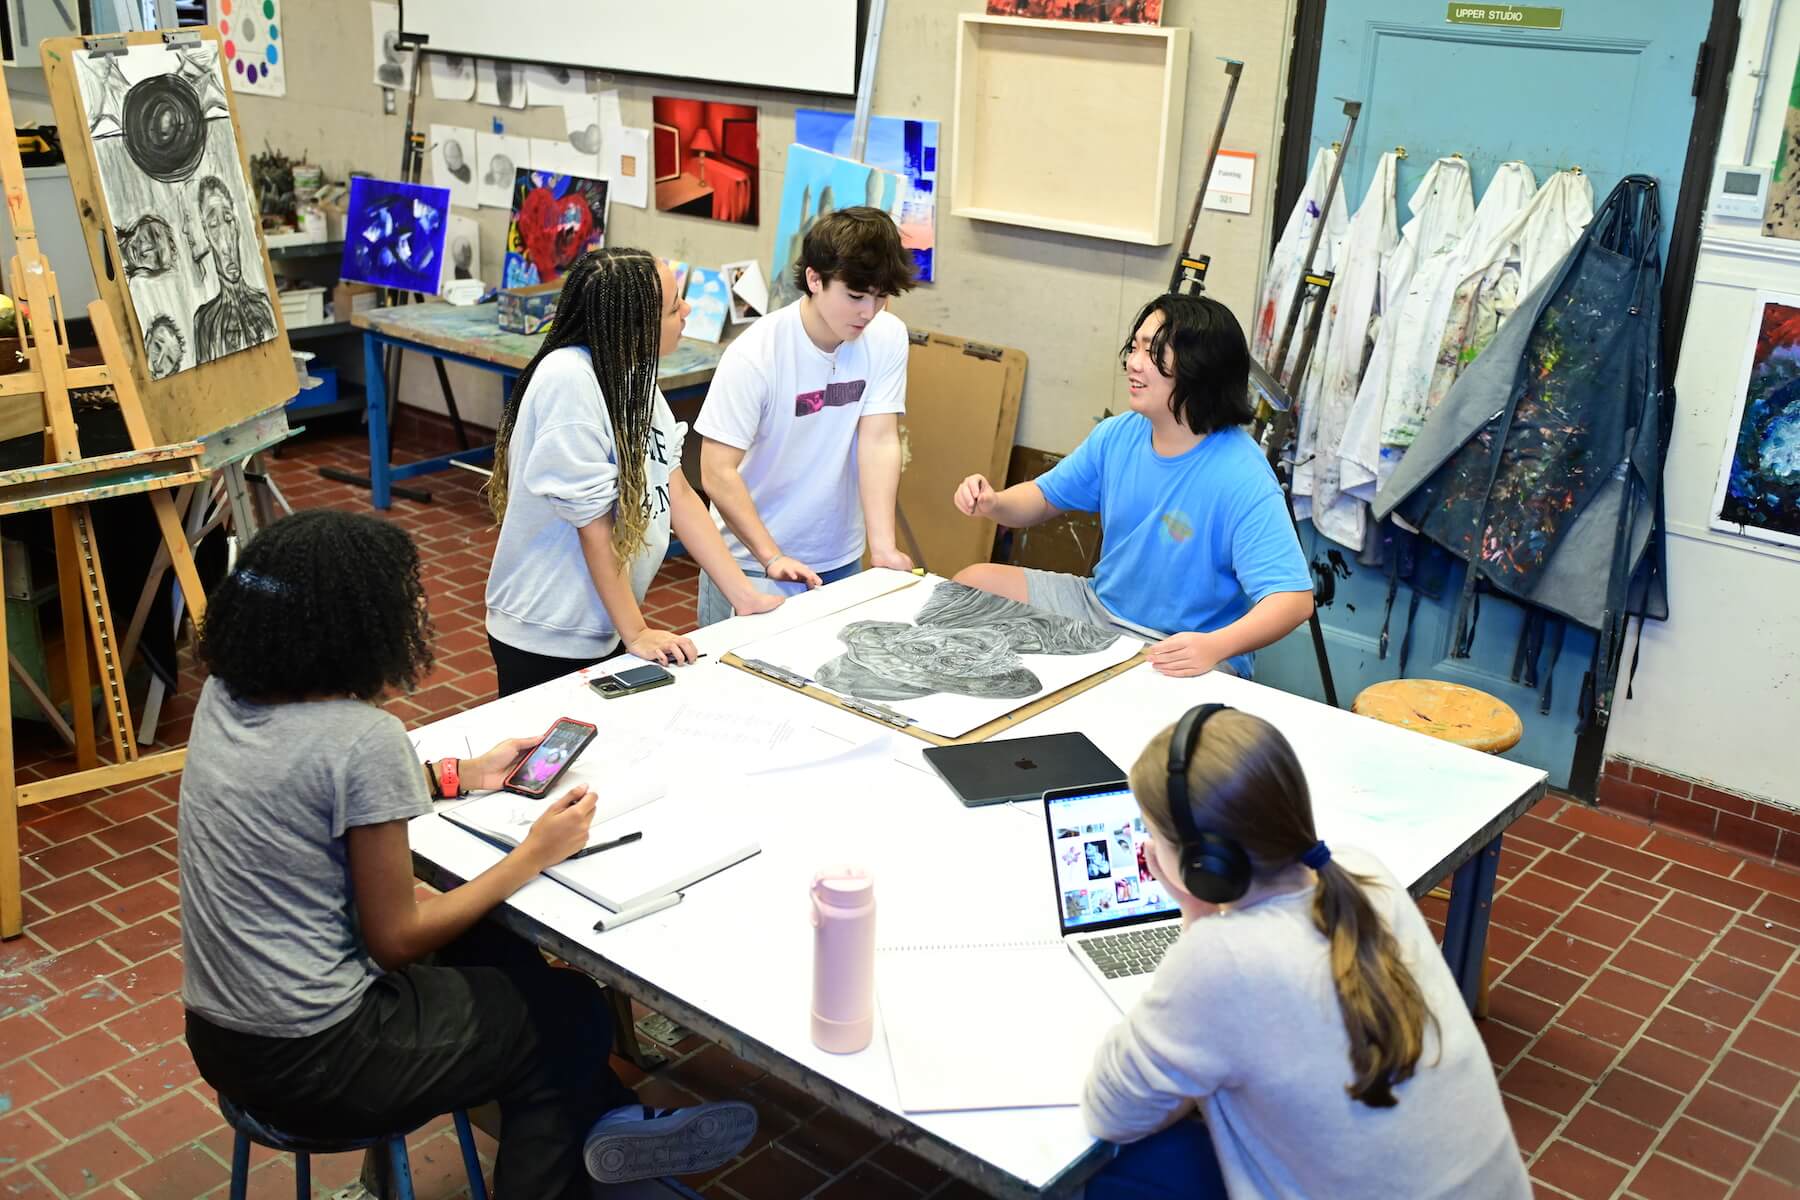 Ethical Culture Fieldston School students working together during visual art class